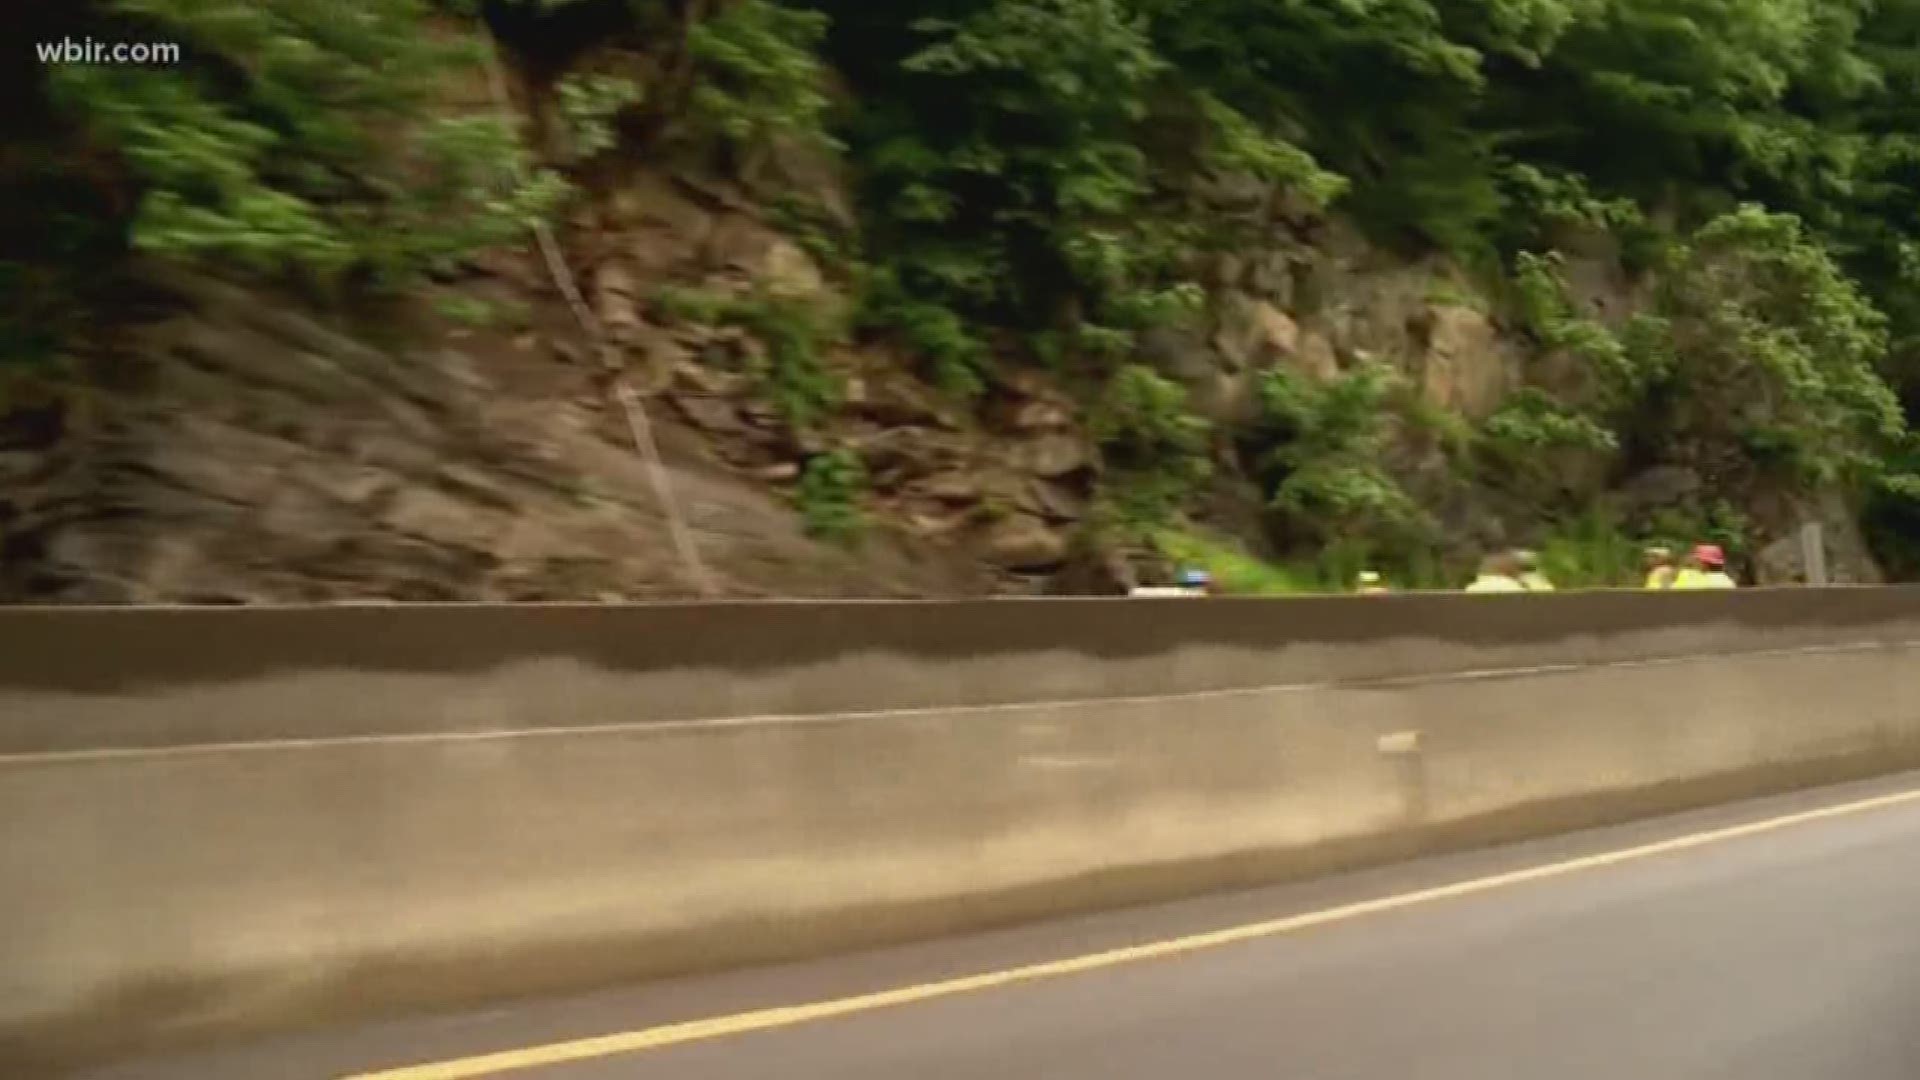 Crews are still working to clear a rockslide on I-40 ahead of the morning rush hour. 10News reporter Yvonne Thomas joins us live near the Tennessee-North Carolina line.